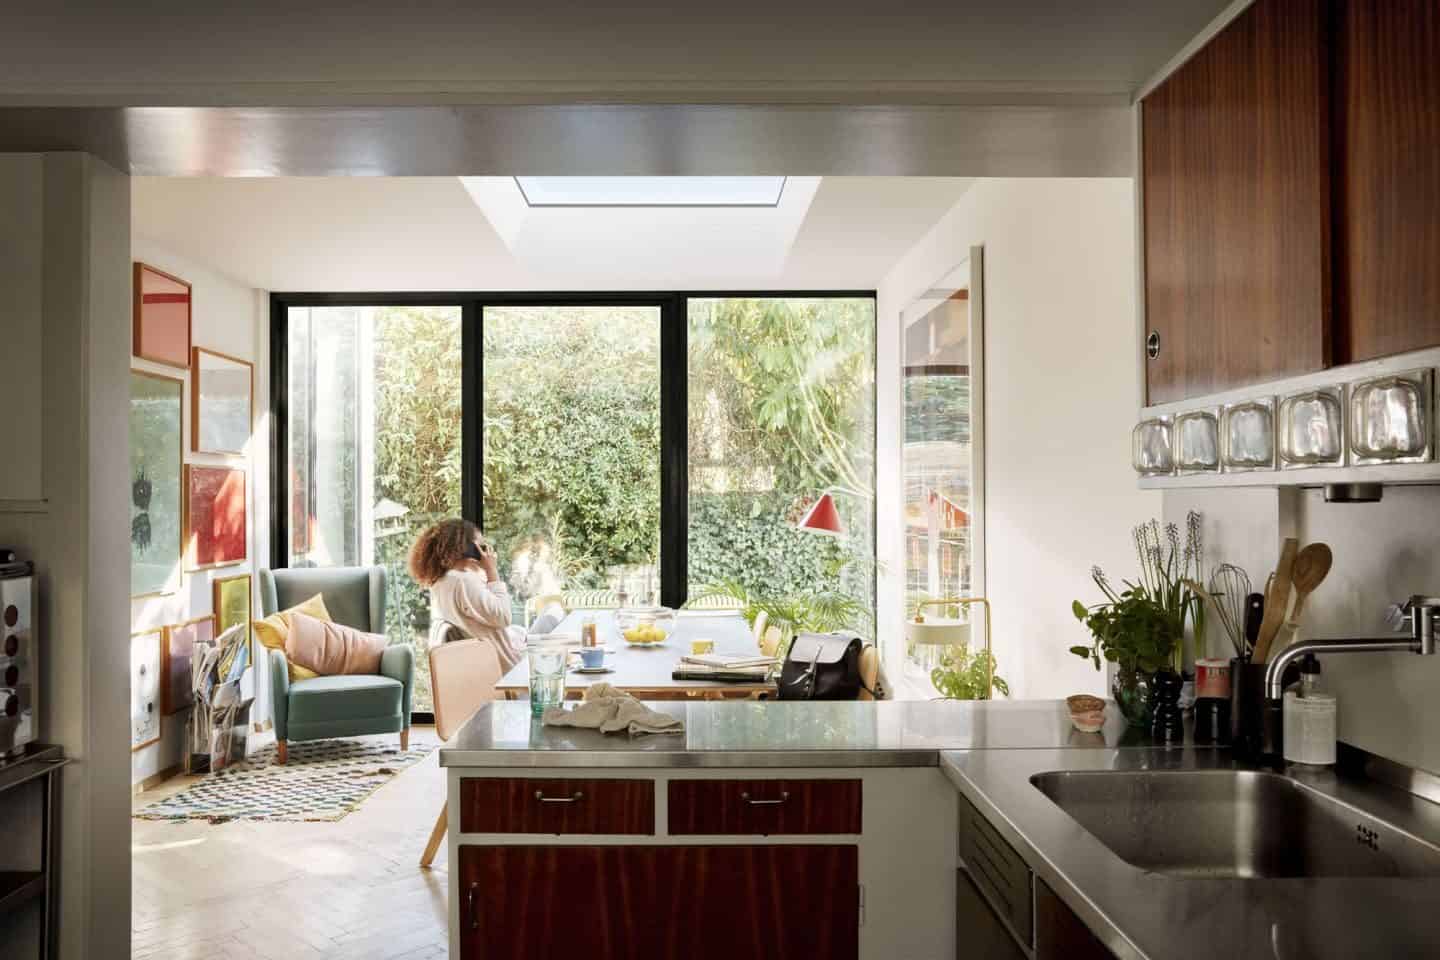 Vario by VELUX Bespoke Flat Roof Windows pictured above an open plan kitchen dining area